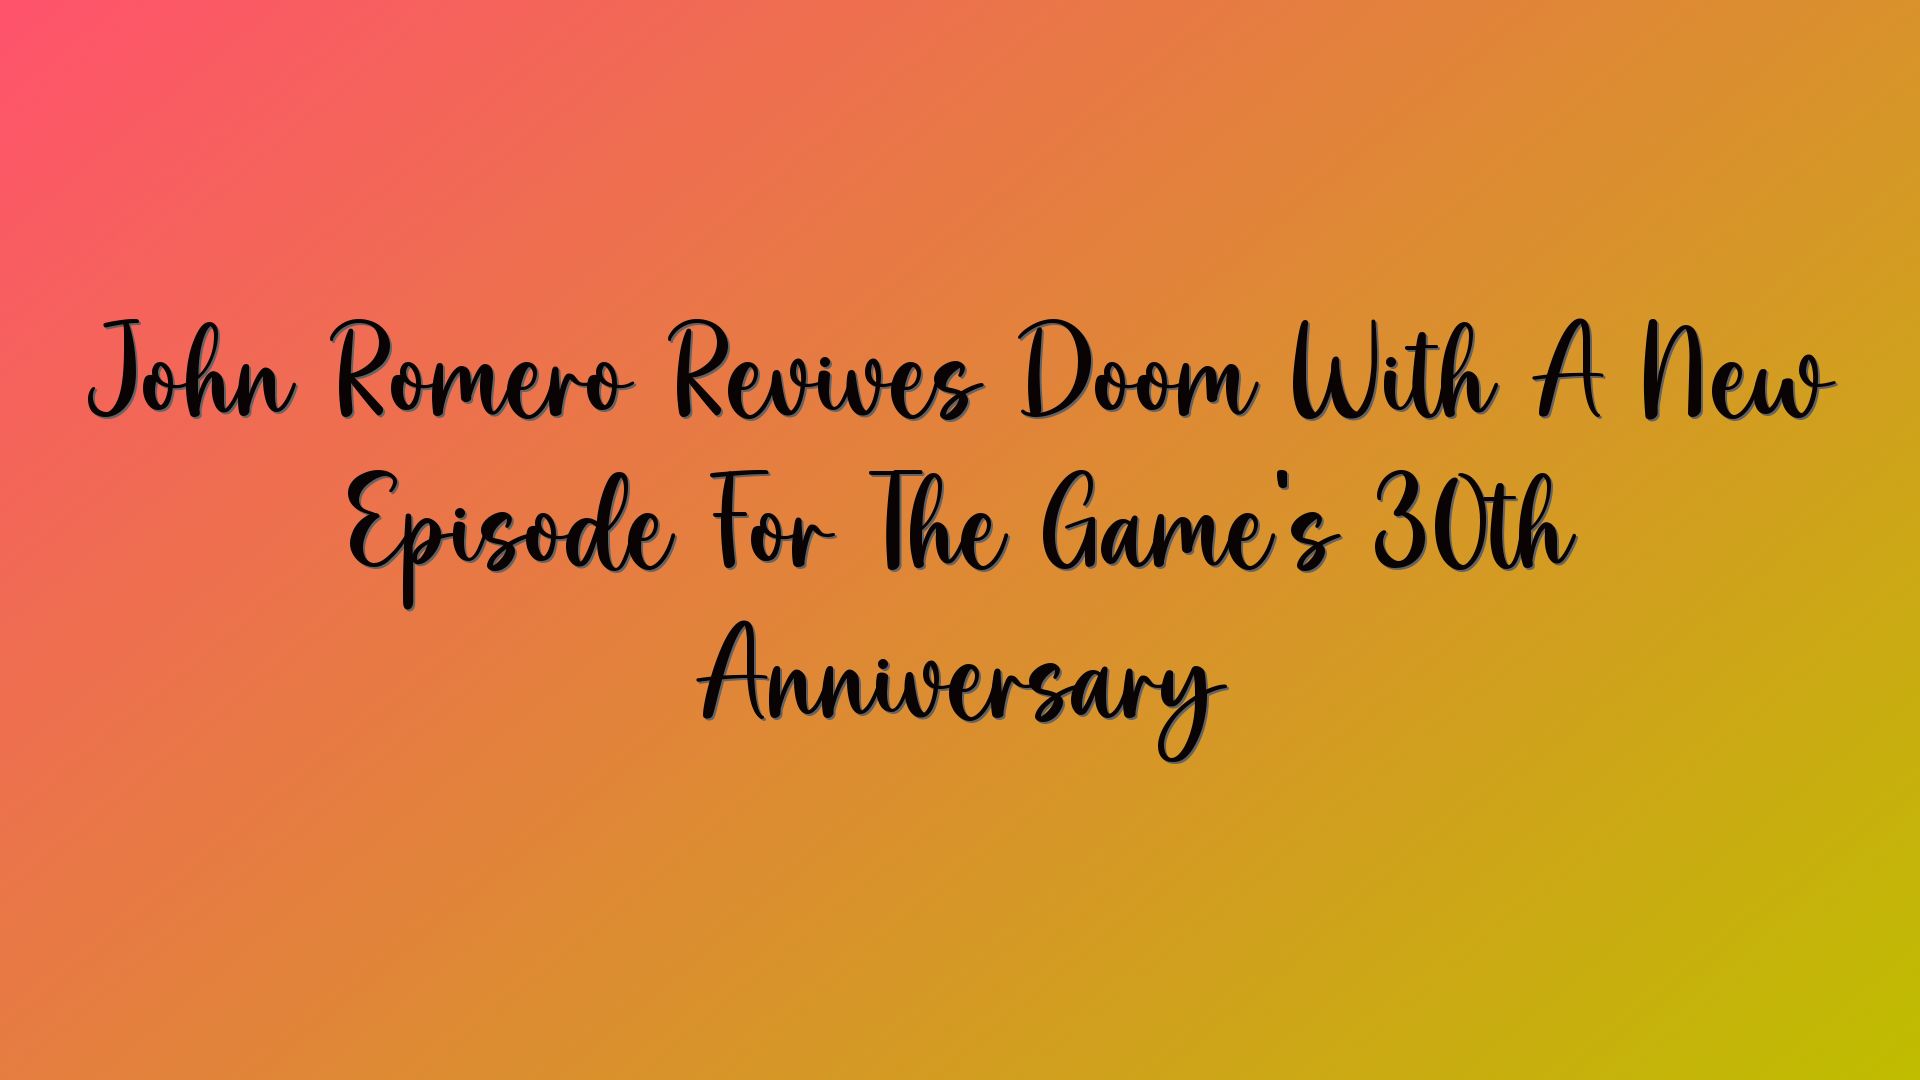 John Romero Revives Doom With A New Episode For The Game’s 30th Anniversary